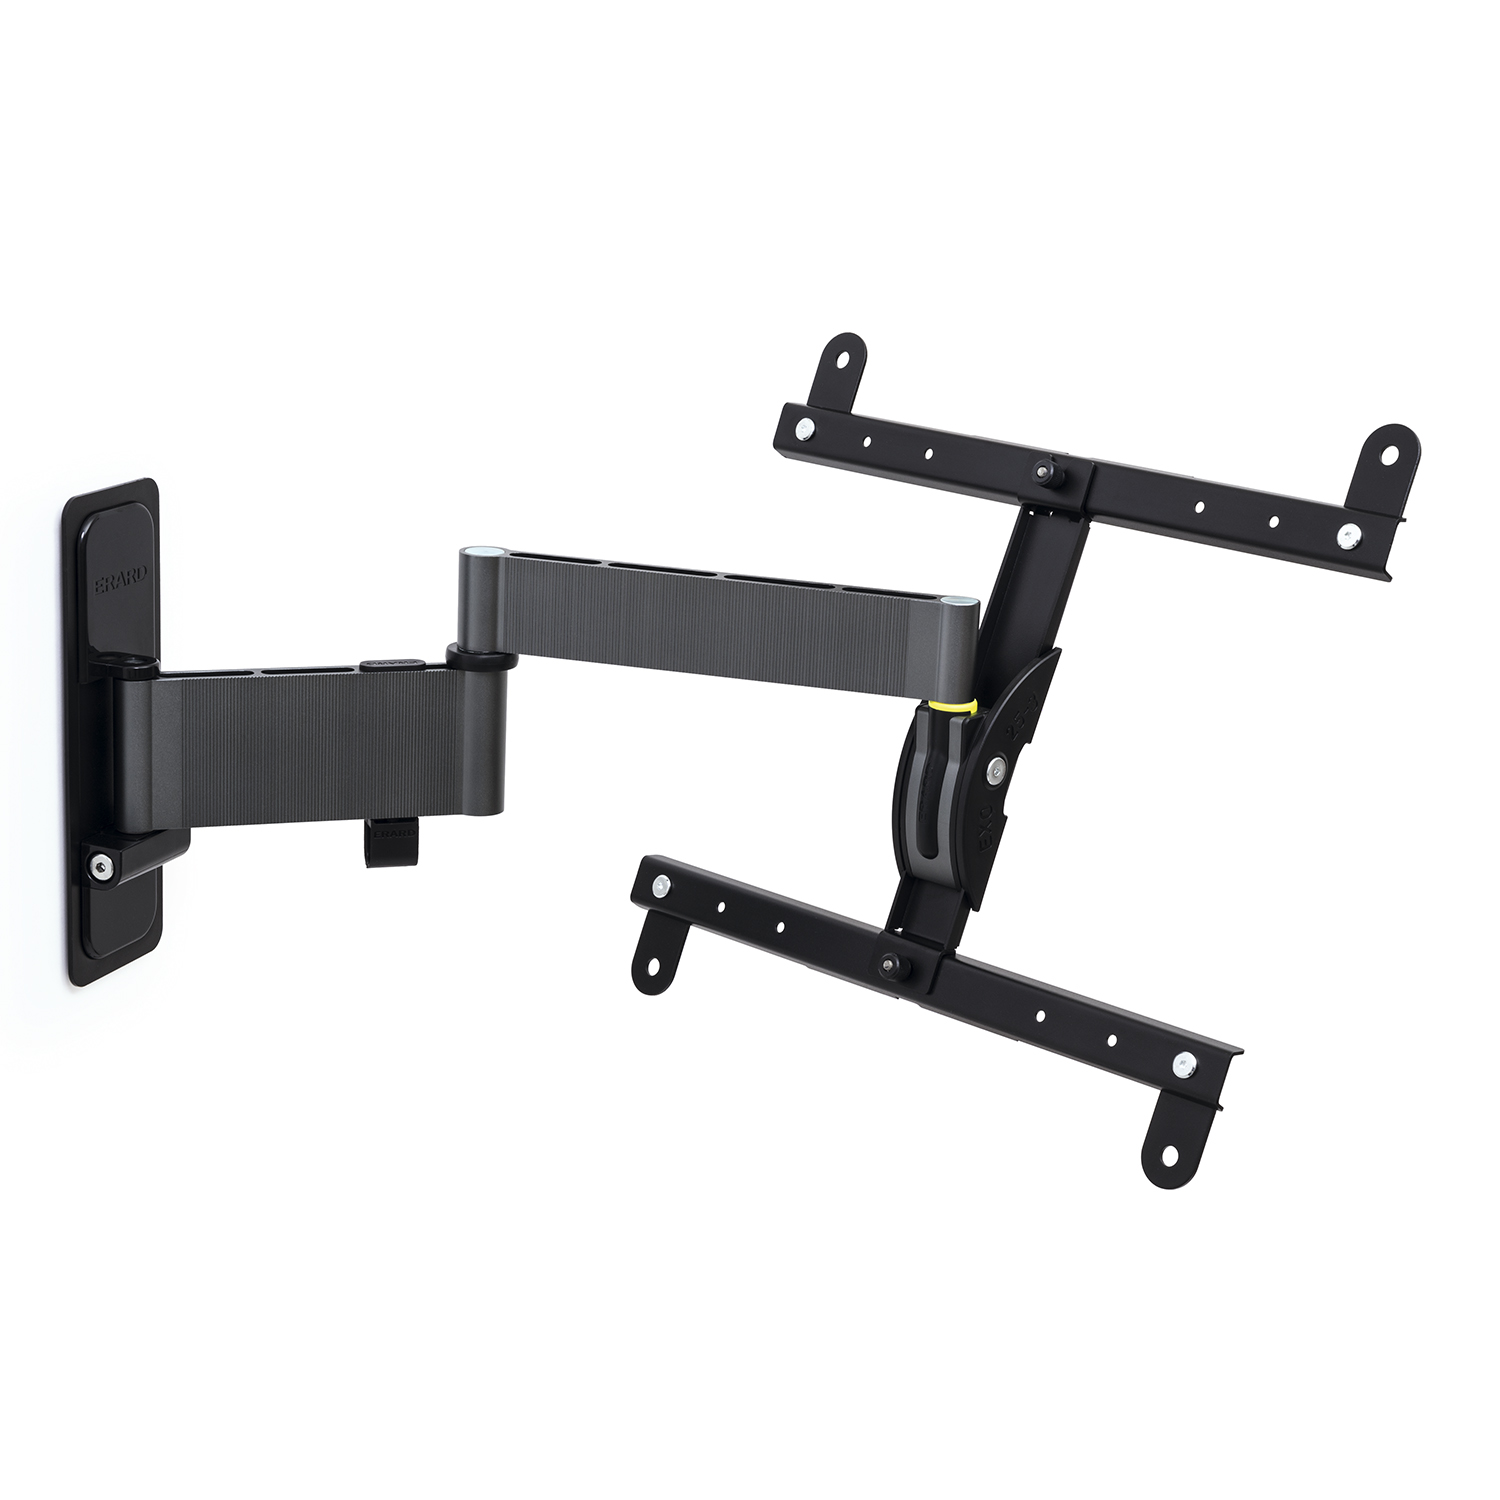 EXO 400TW3 - support mural inclinable orientable